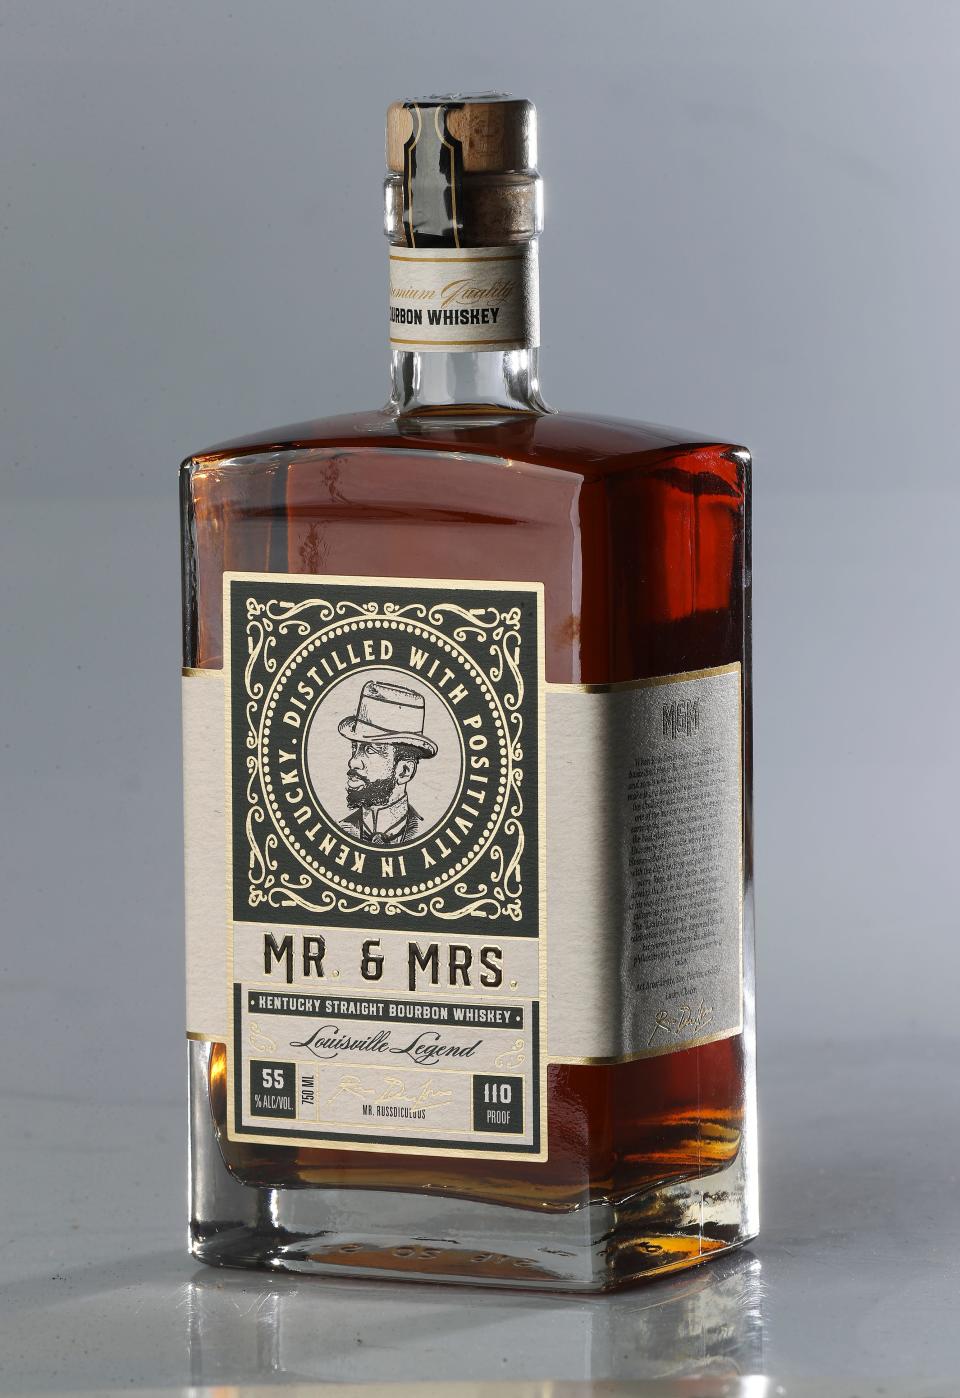 Former U of L basketball standout Russ Smith is promoting a line of bourbon whiskey called Mr. and Mrs. in Louisville, Ky. on Jan. 19, 2022.  This is the “Louisville Legend” version.